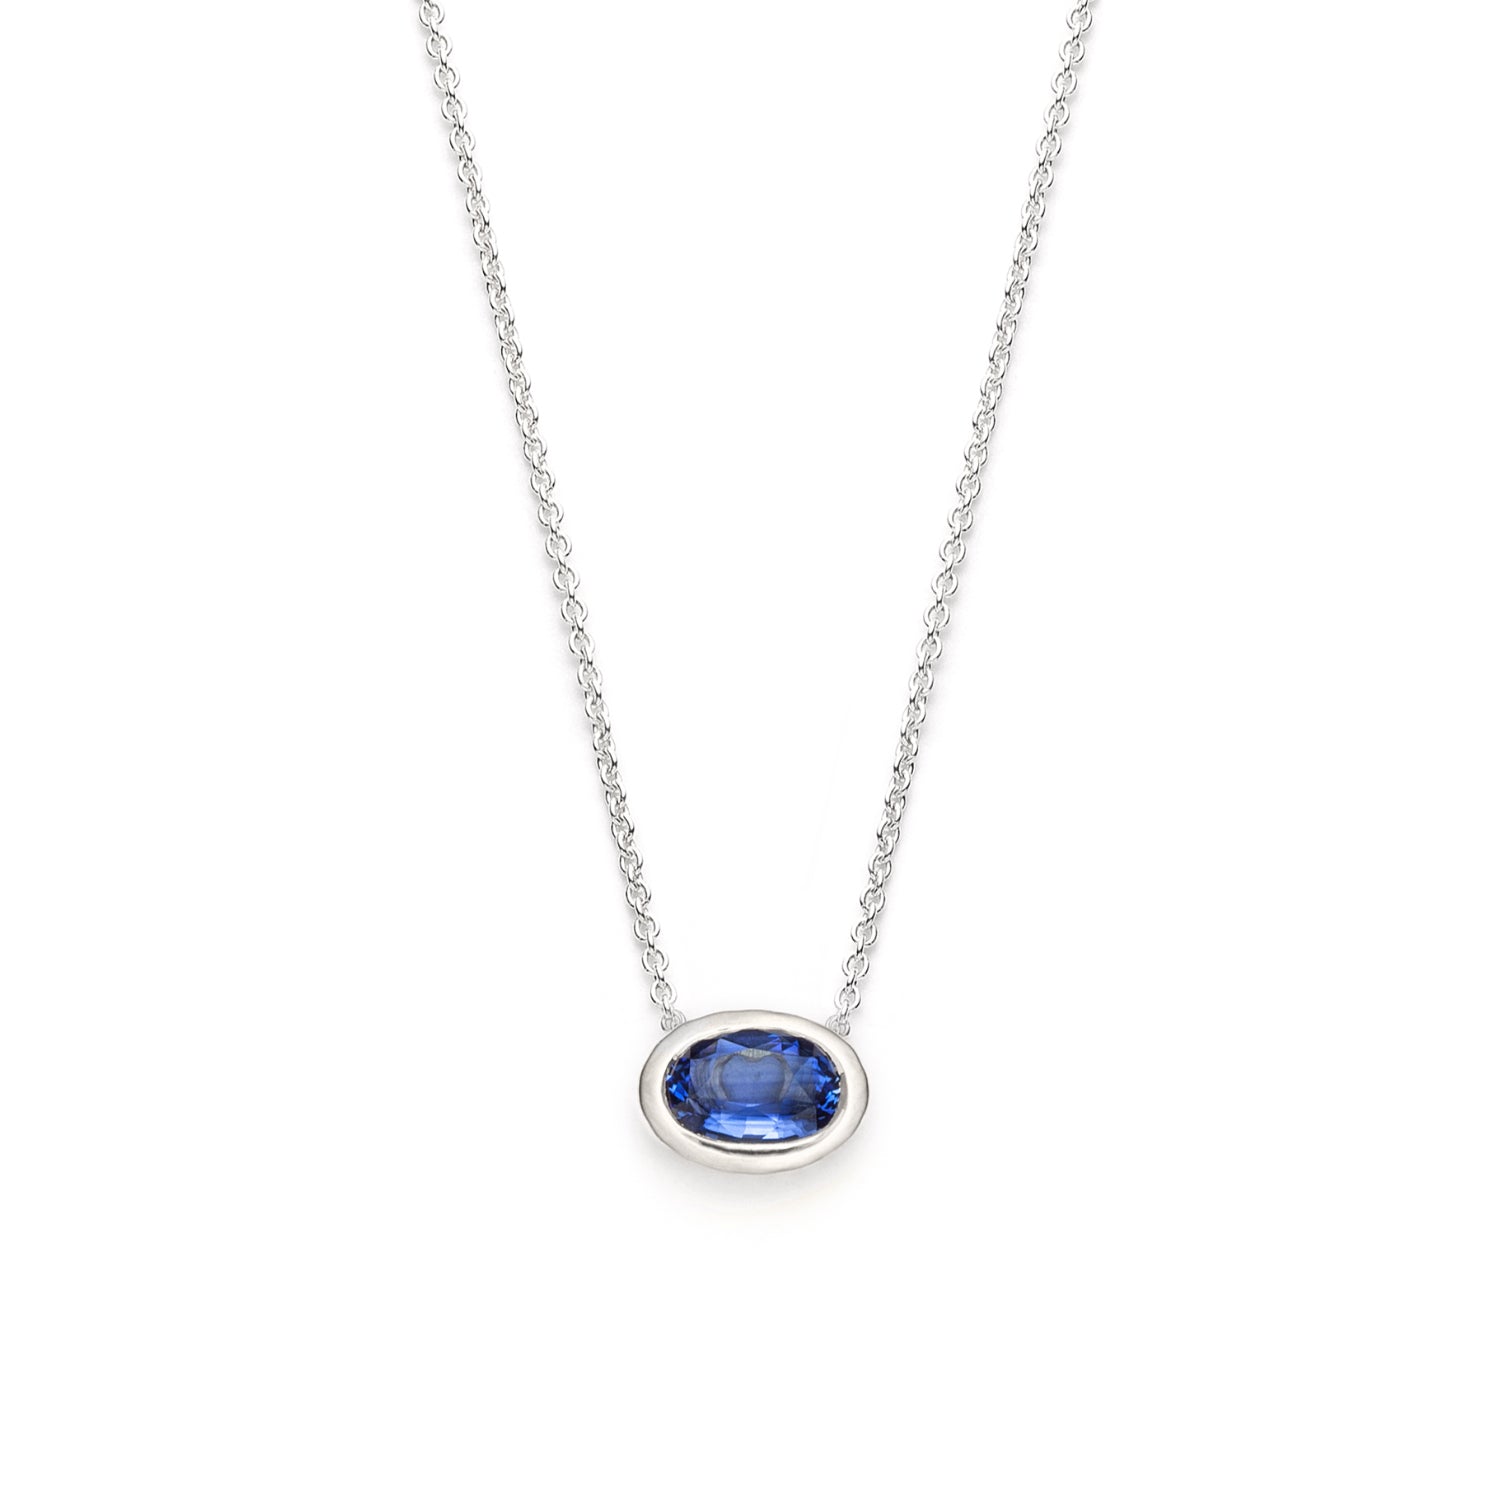 Oval-Shaped Sapphire Bezel Necklace in White Gold